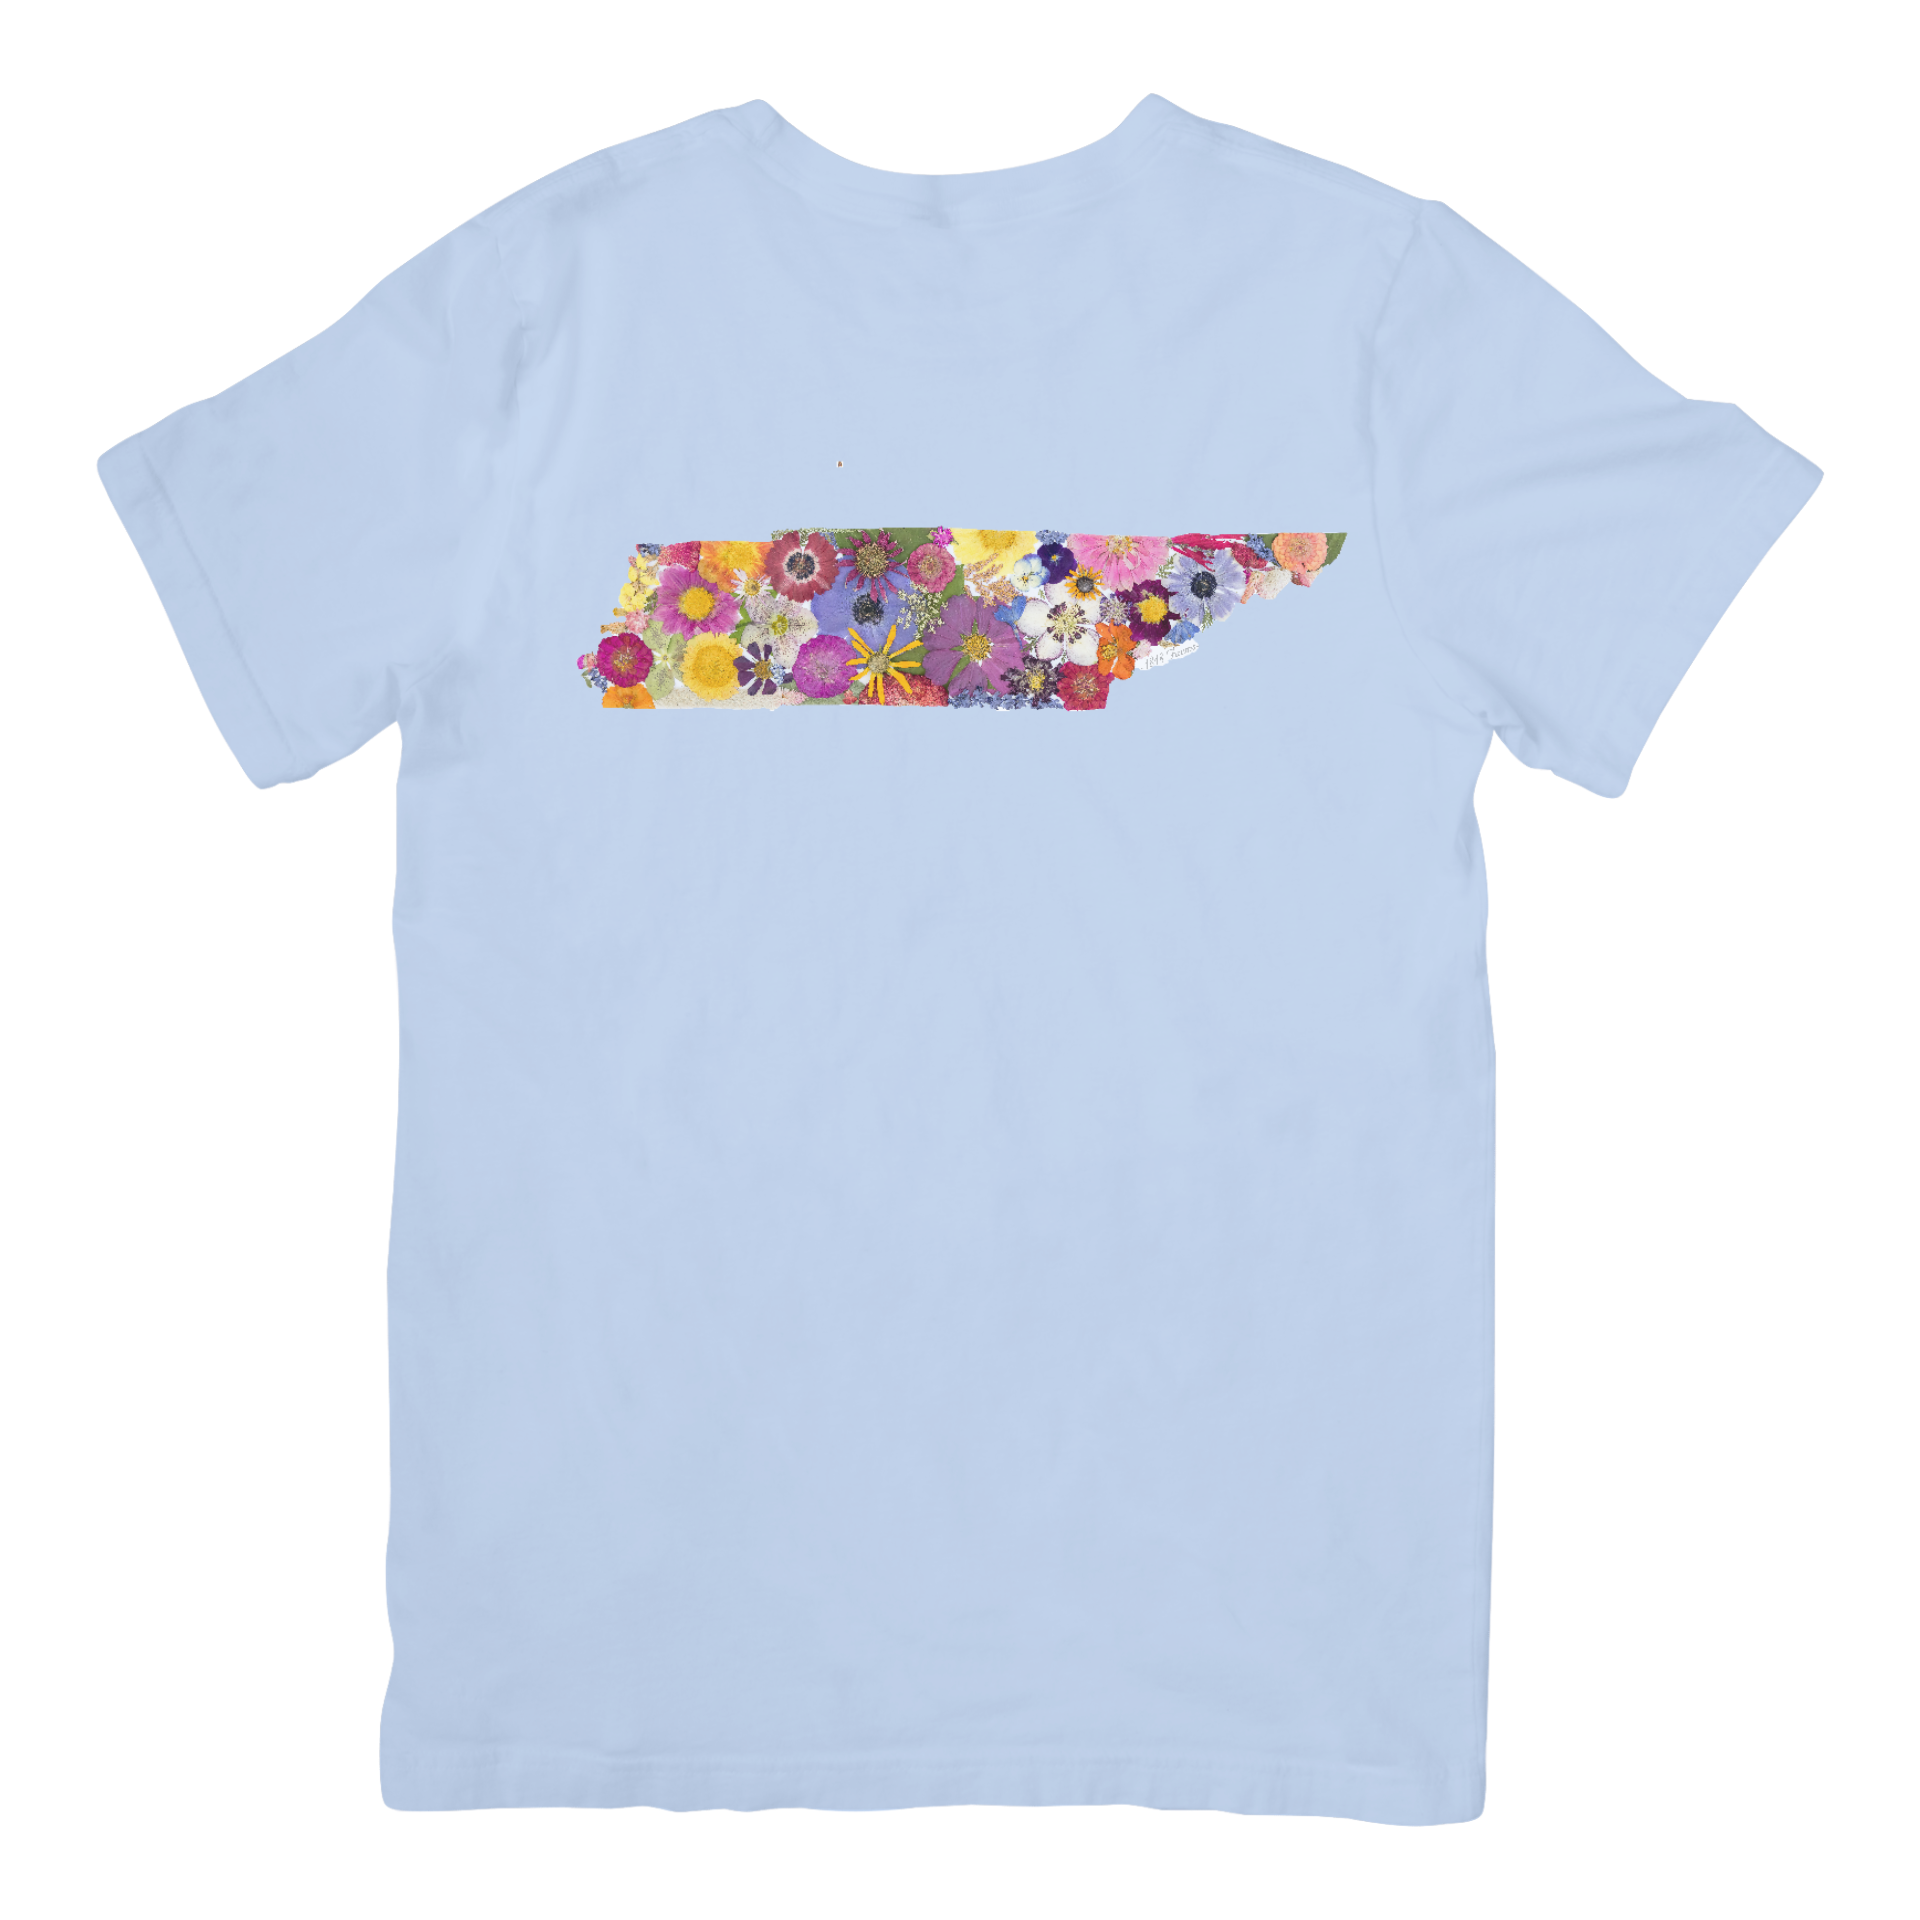 State Themed Comfort Colors Tshirt - "Where I Bloom" Collection TShirt 1818 Farms Tennesse Chambray Blue Small